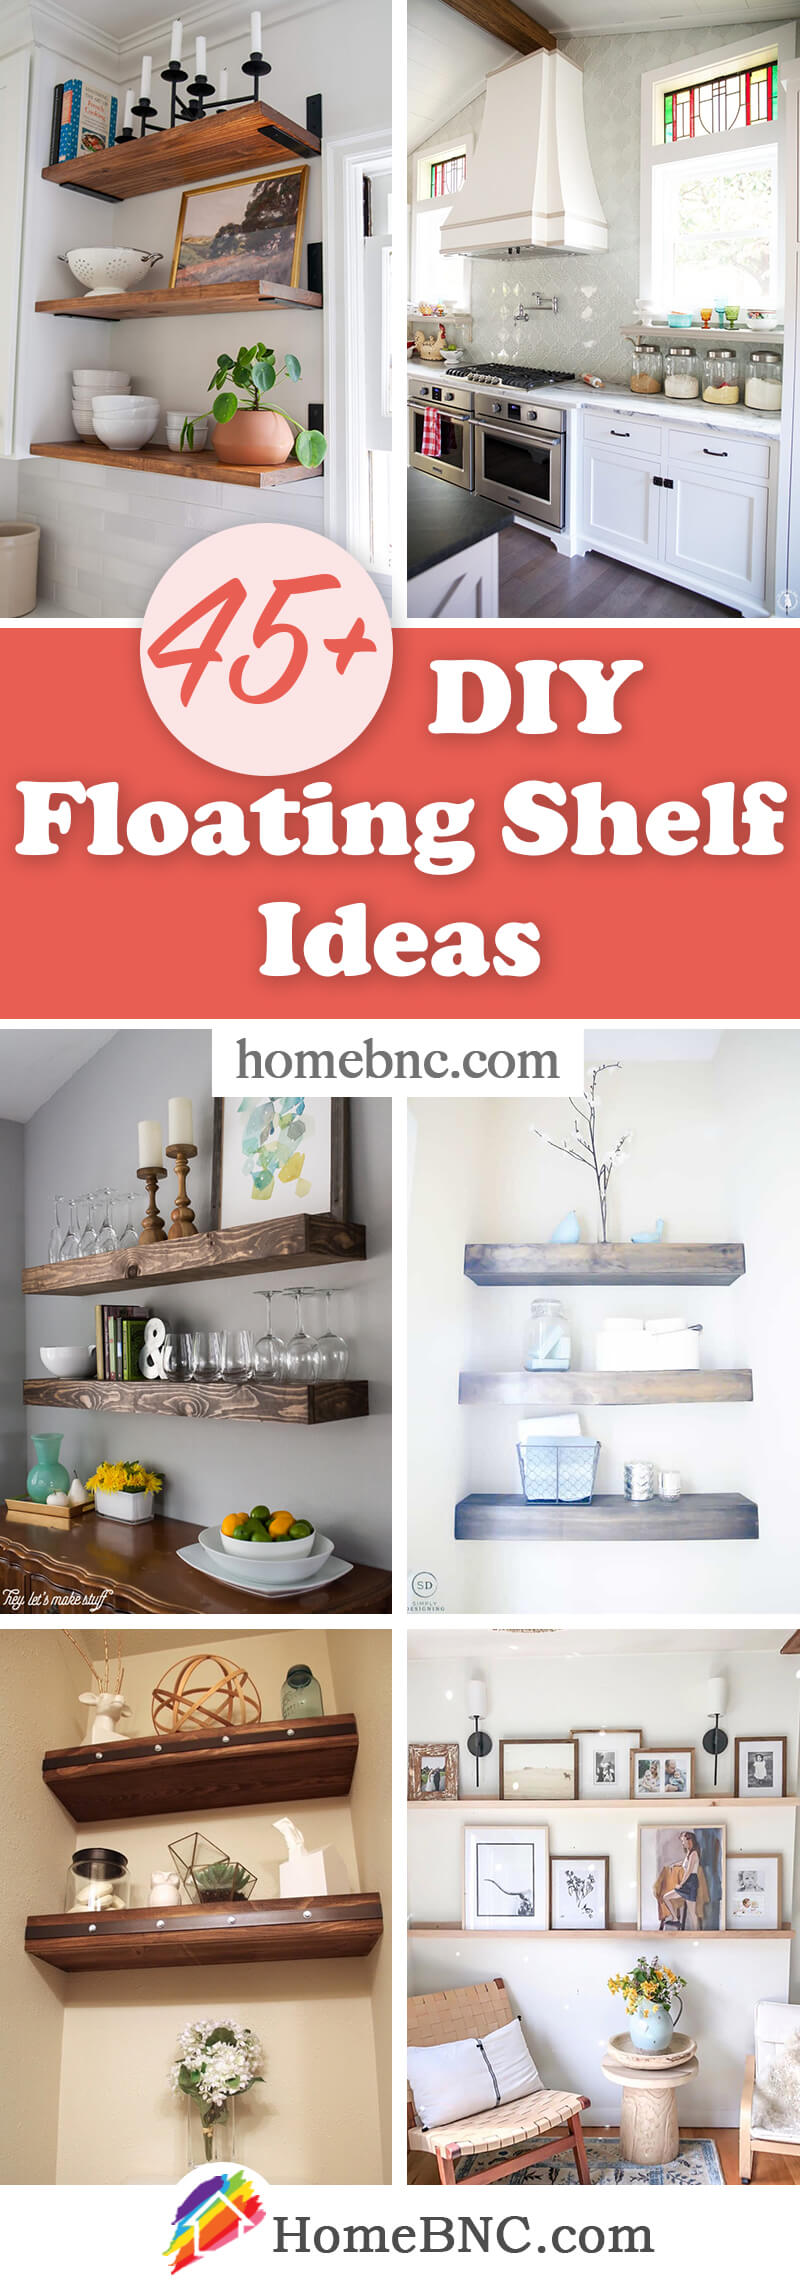 45 Best Diy Floating Shelf Ideas And Designs For 2021